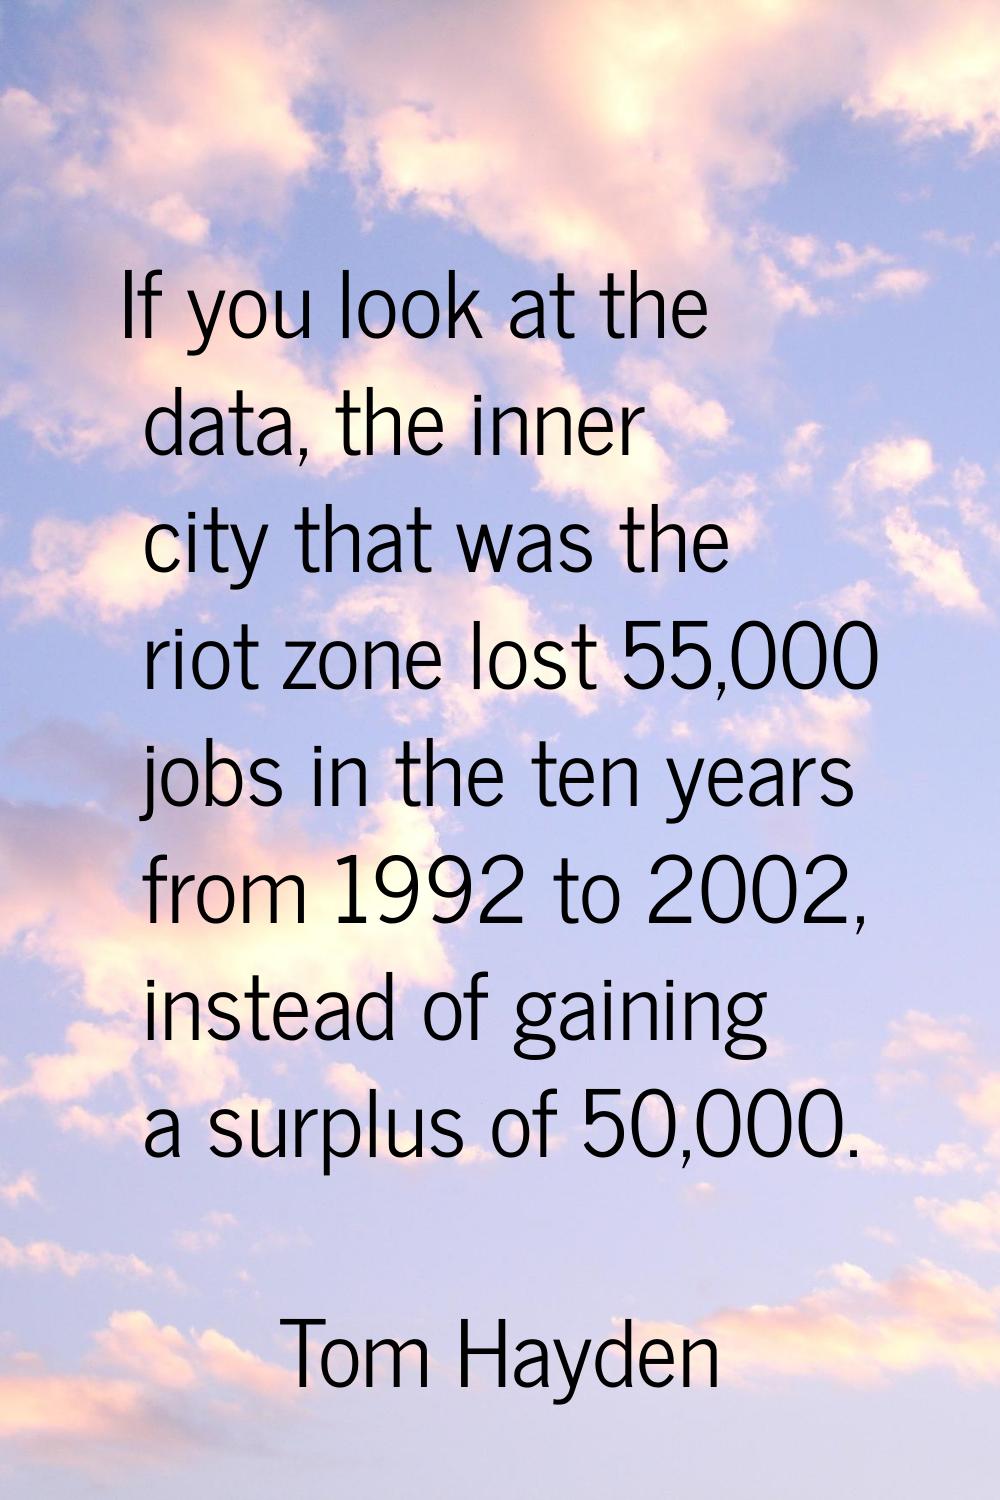 If you look at the data, the inner city that was the riot zone lost 55,000 jobs in the ten years fr